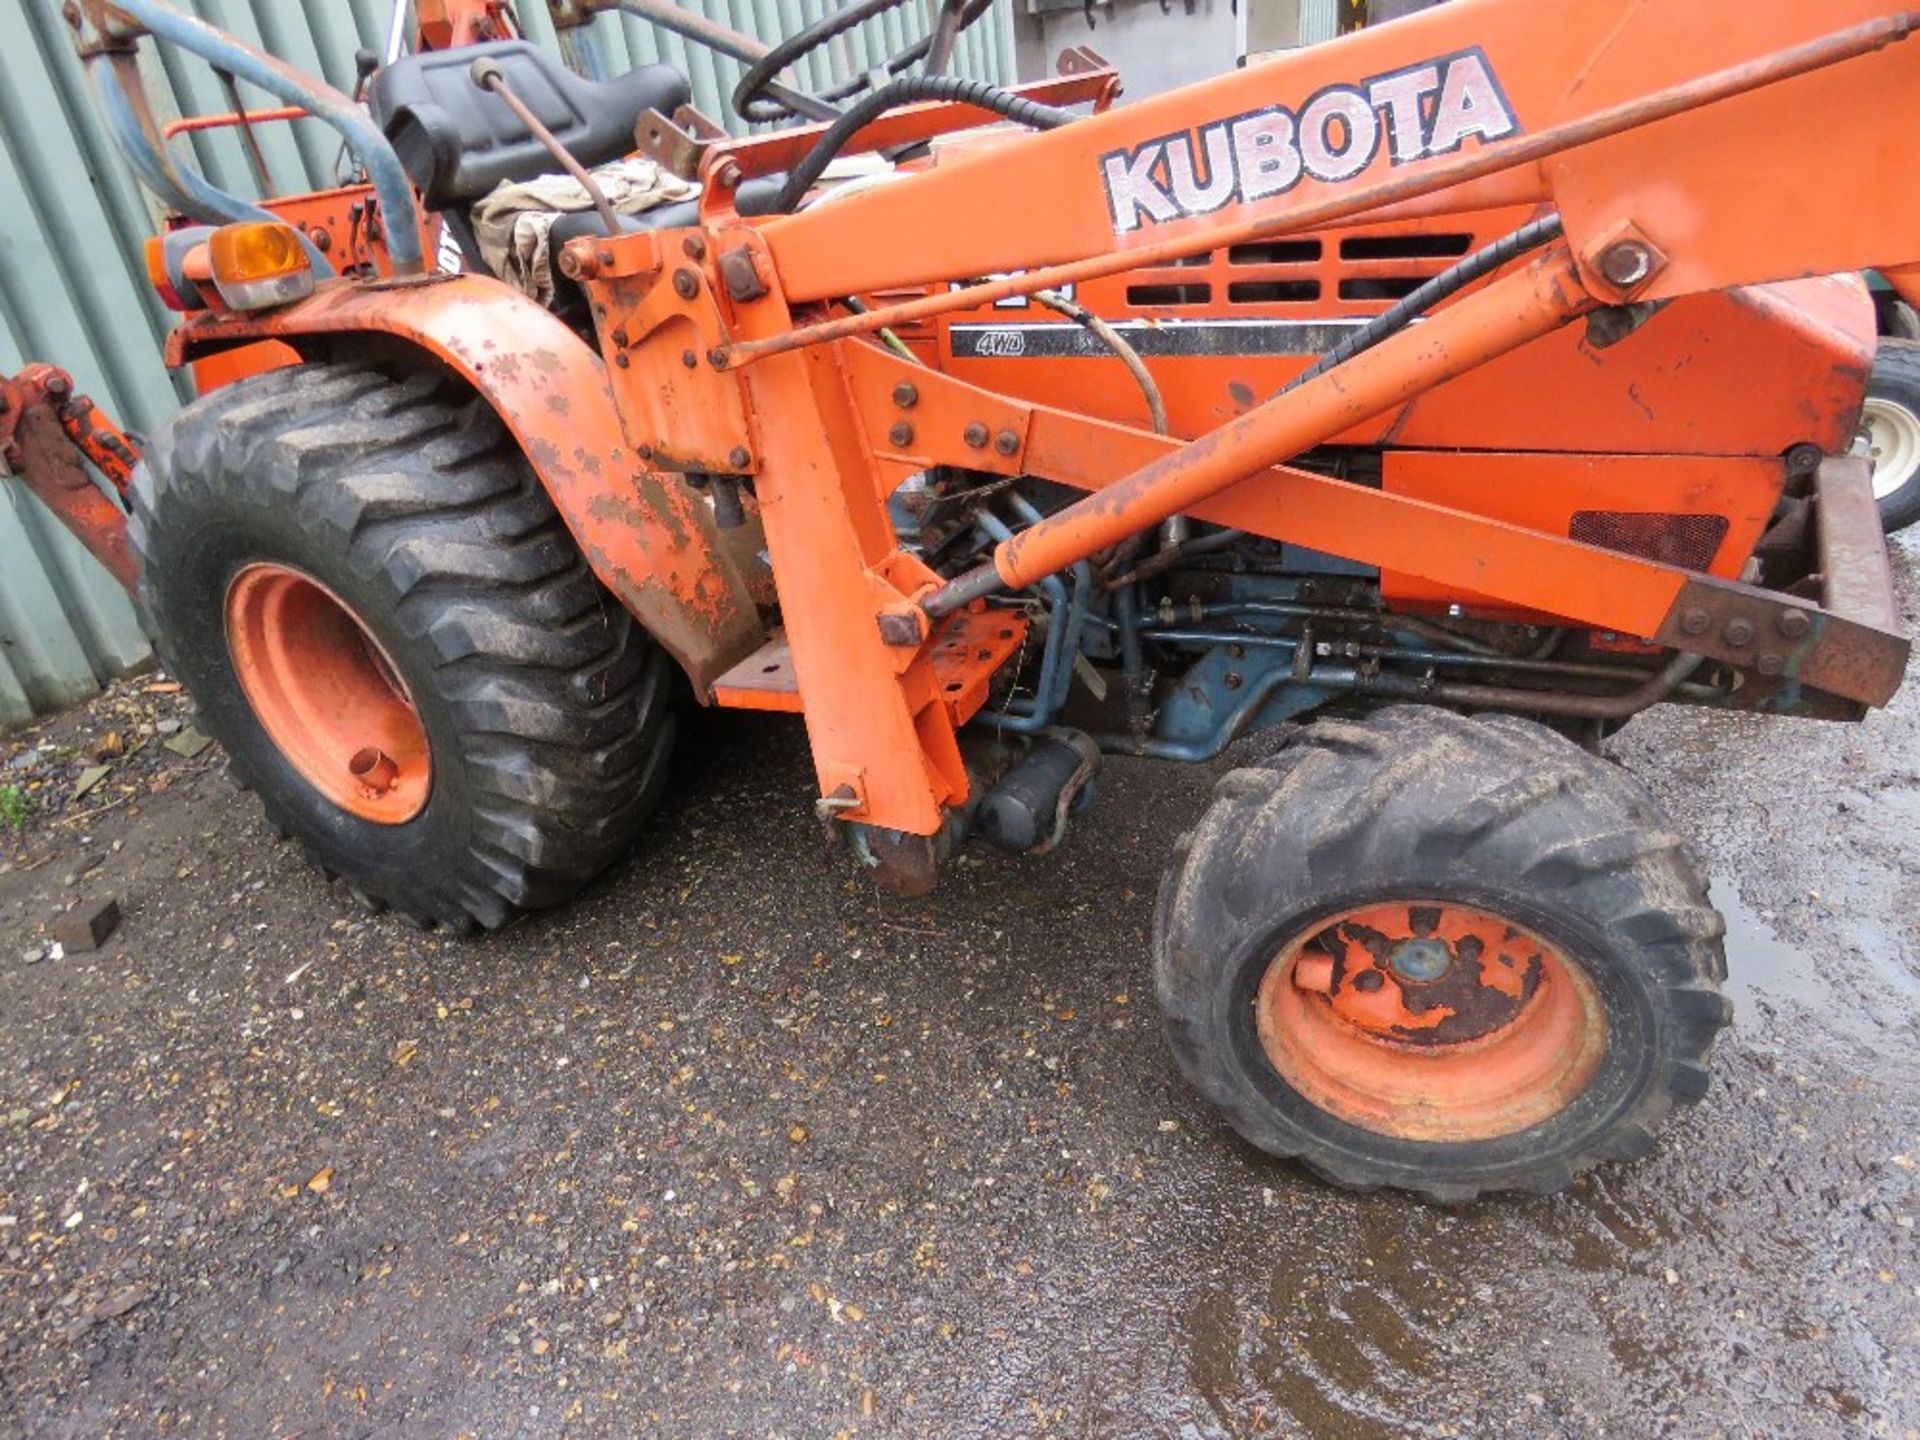 KUBOTA B20 4WD COMPACT LOADER TRACTOR WITH BACKHOE DIGGER. HYDRASTATIC DRIVE. 969 REC HOURS. WHEN TE - Image 4 of 13